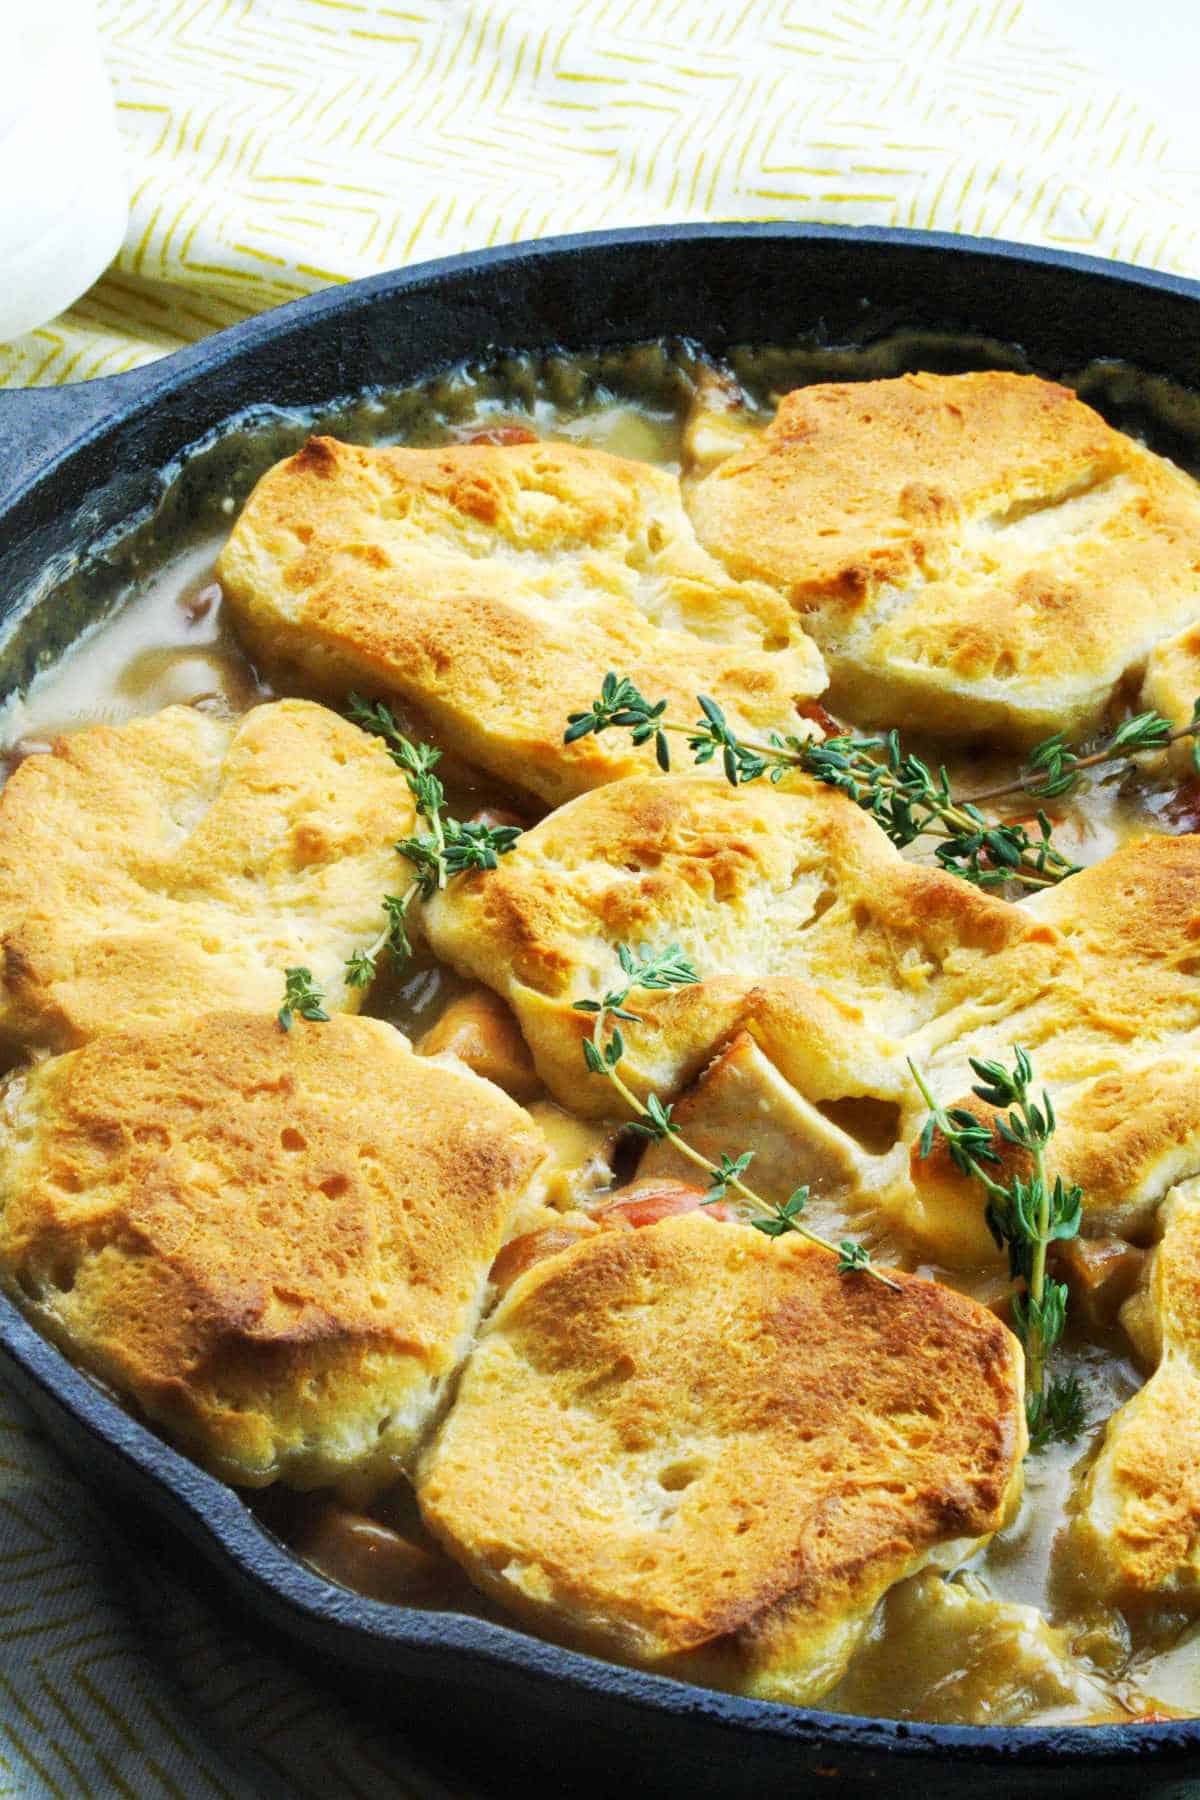 cast iron chicken pot pie with biscuits on top.